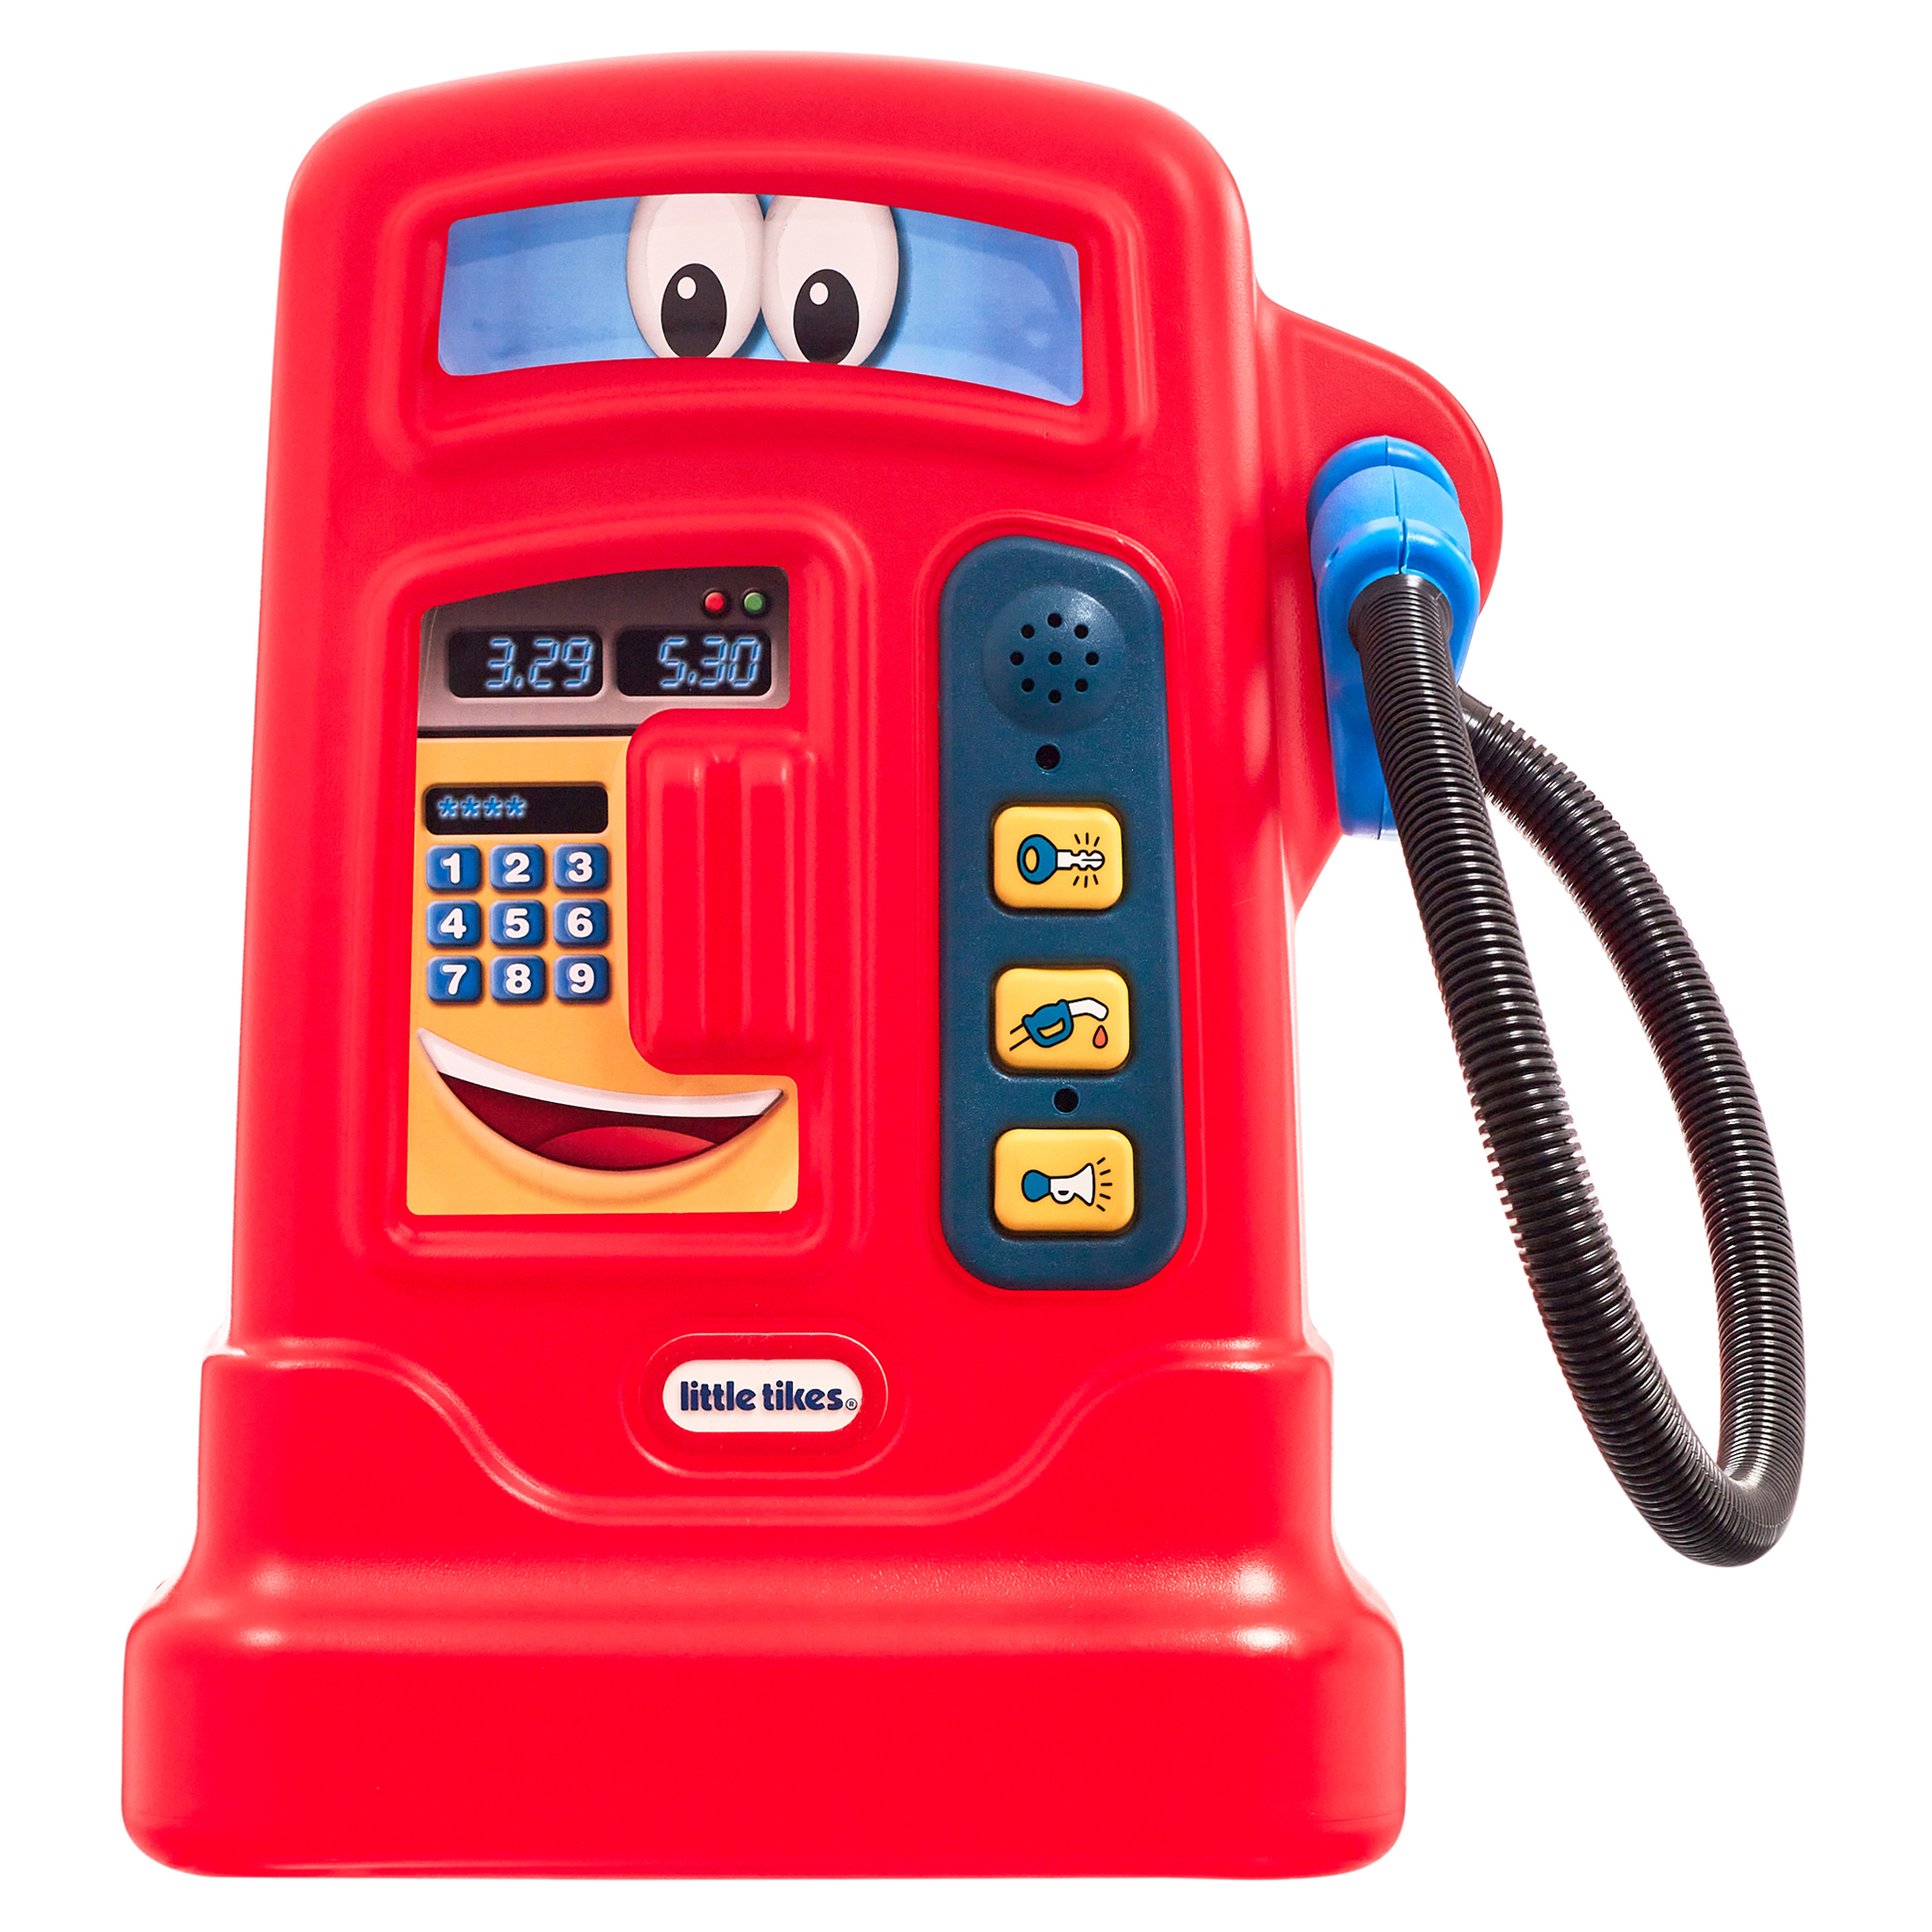 Little Tikes Cozy Pumper in Red, Pretend Play Toy with Interactive Sounds, Use w/ Cozy Coupe Ride-on Cars, Kids Boys Girls Ages 2-5 Years - image 1 of 8